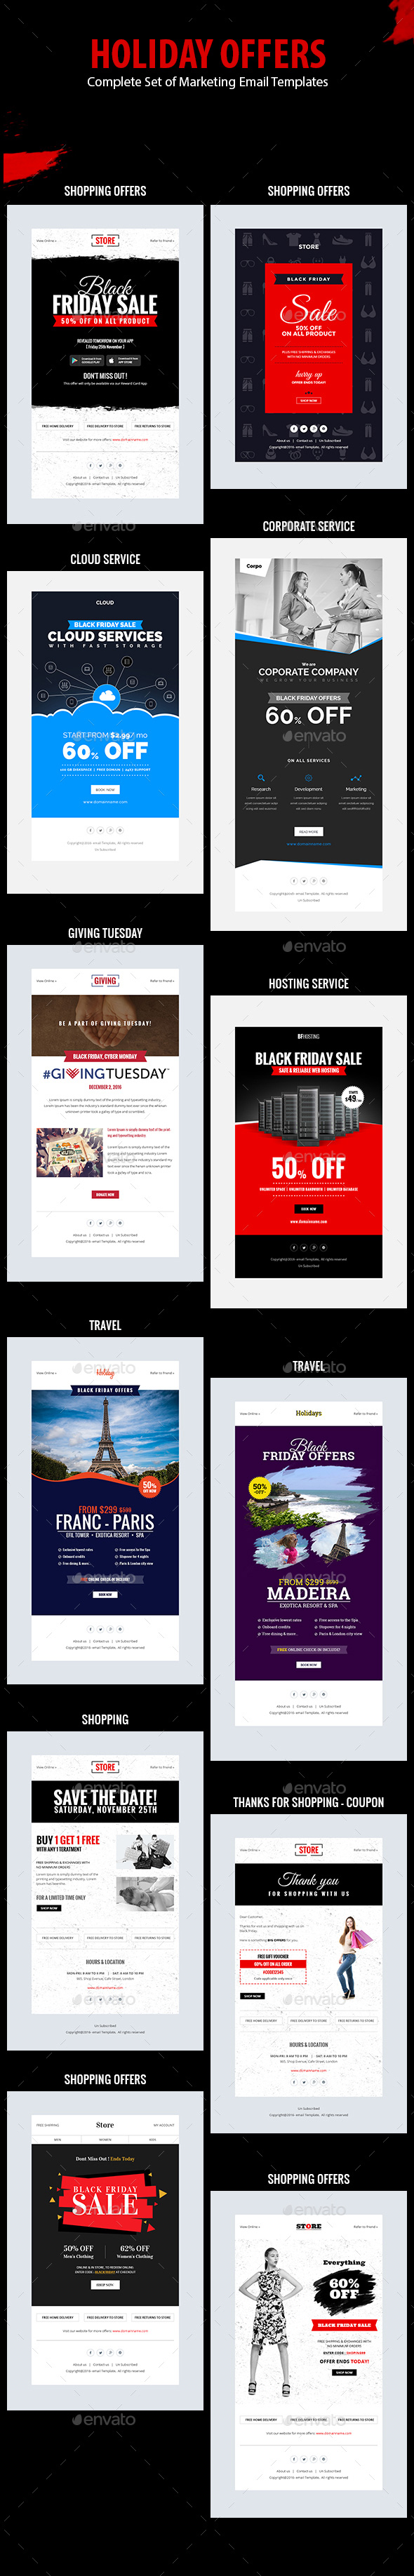 Holiday Offers - Complete Set of Marketing Email Templates - 1